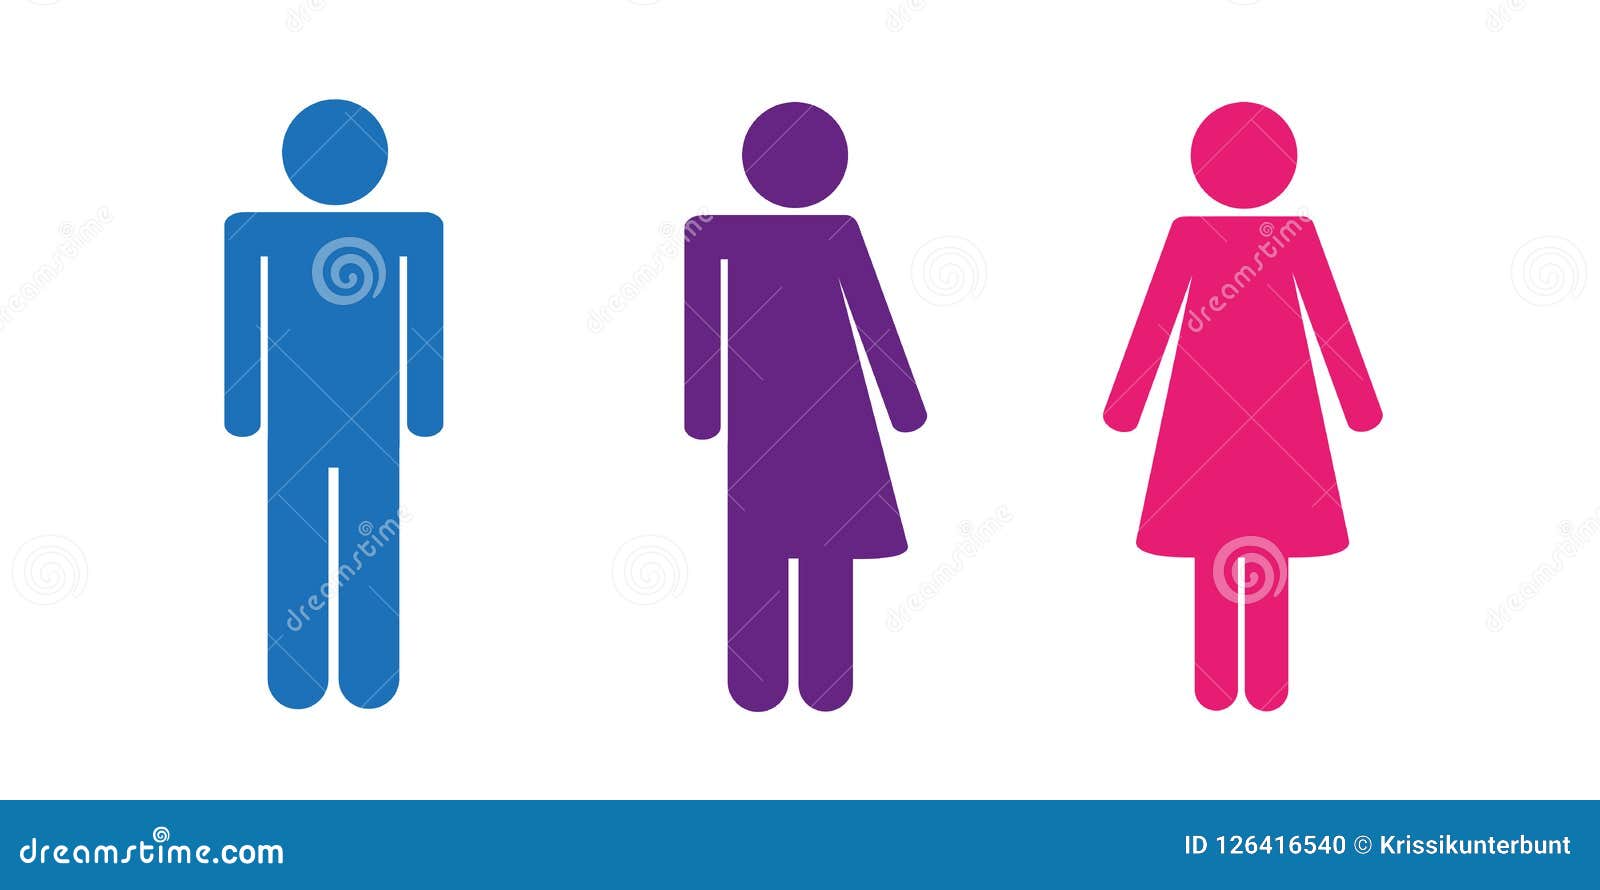 colorful set of restroom icons including gender neutral icon pictogram